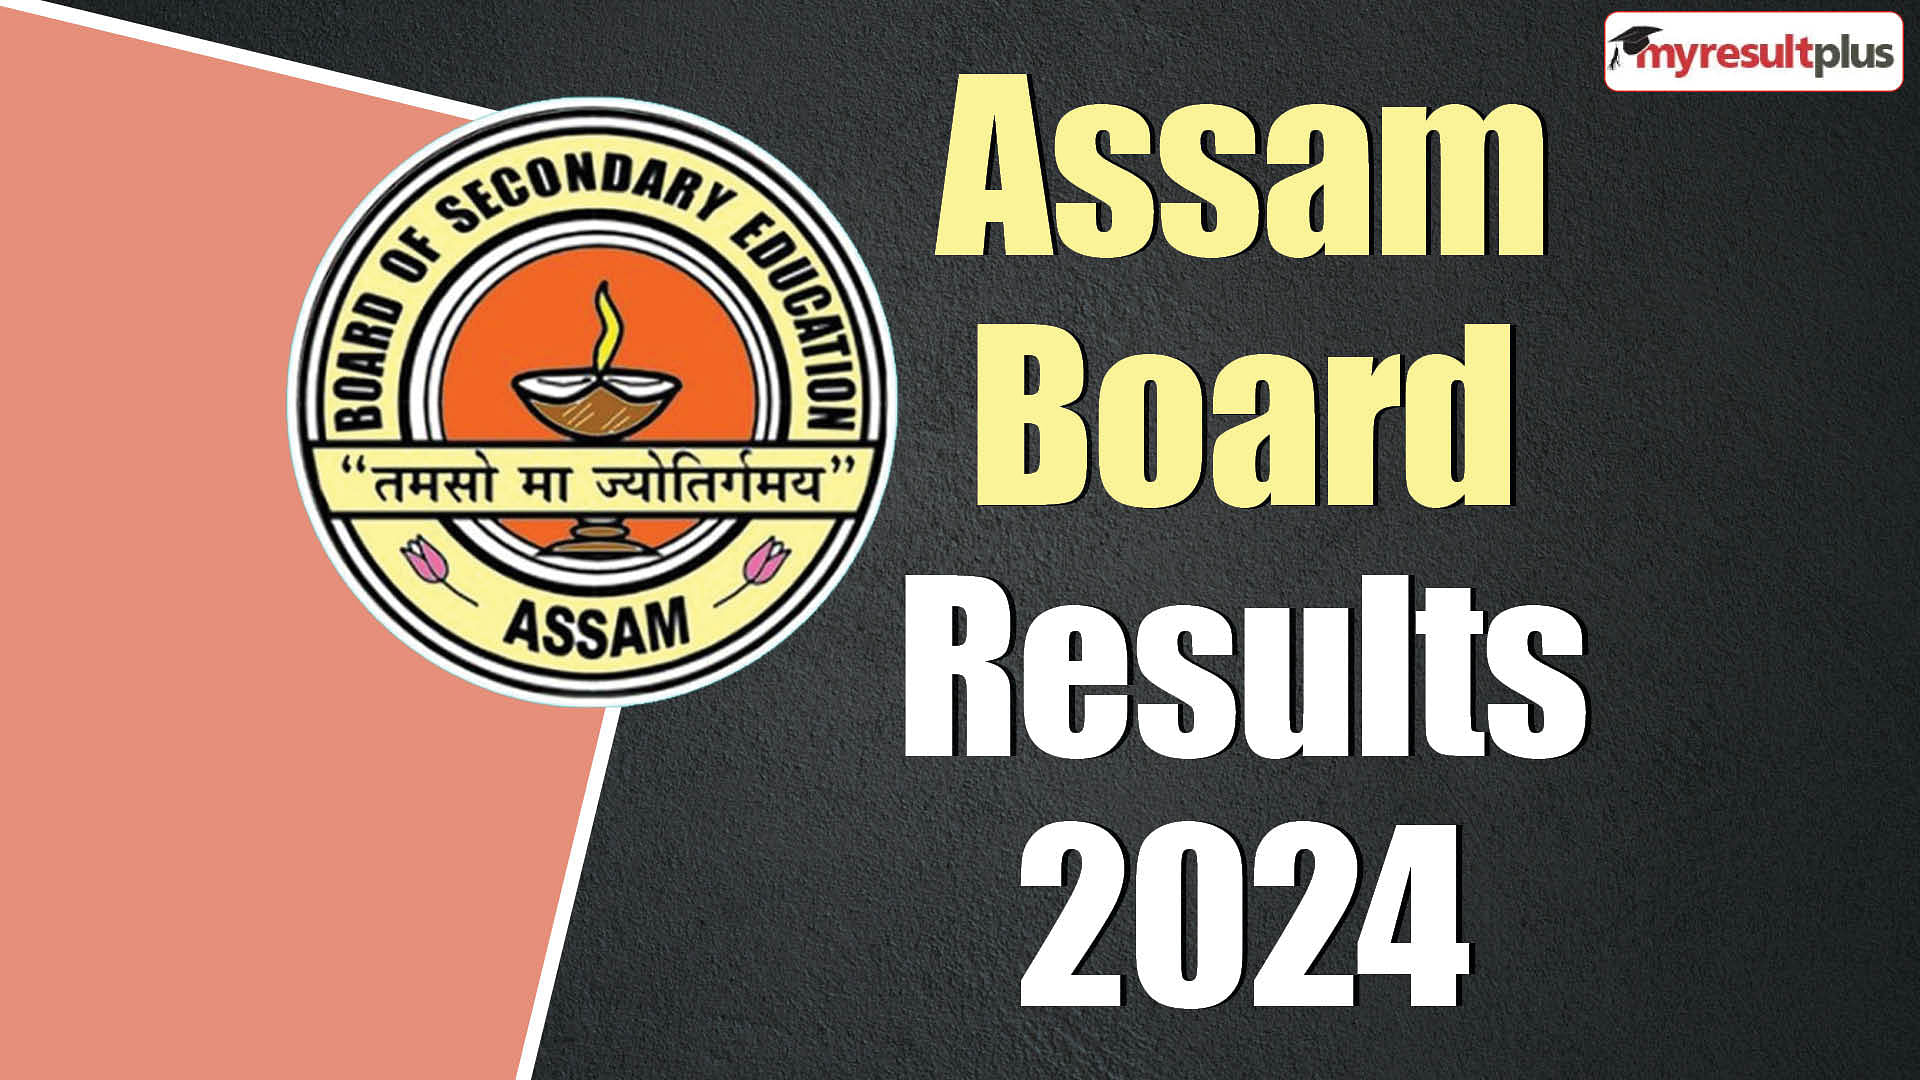 Assam HSLC compartment exam result 2024 declared, Check how to download and other details here